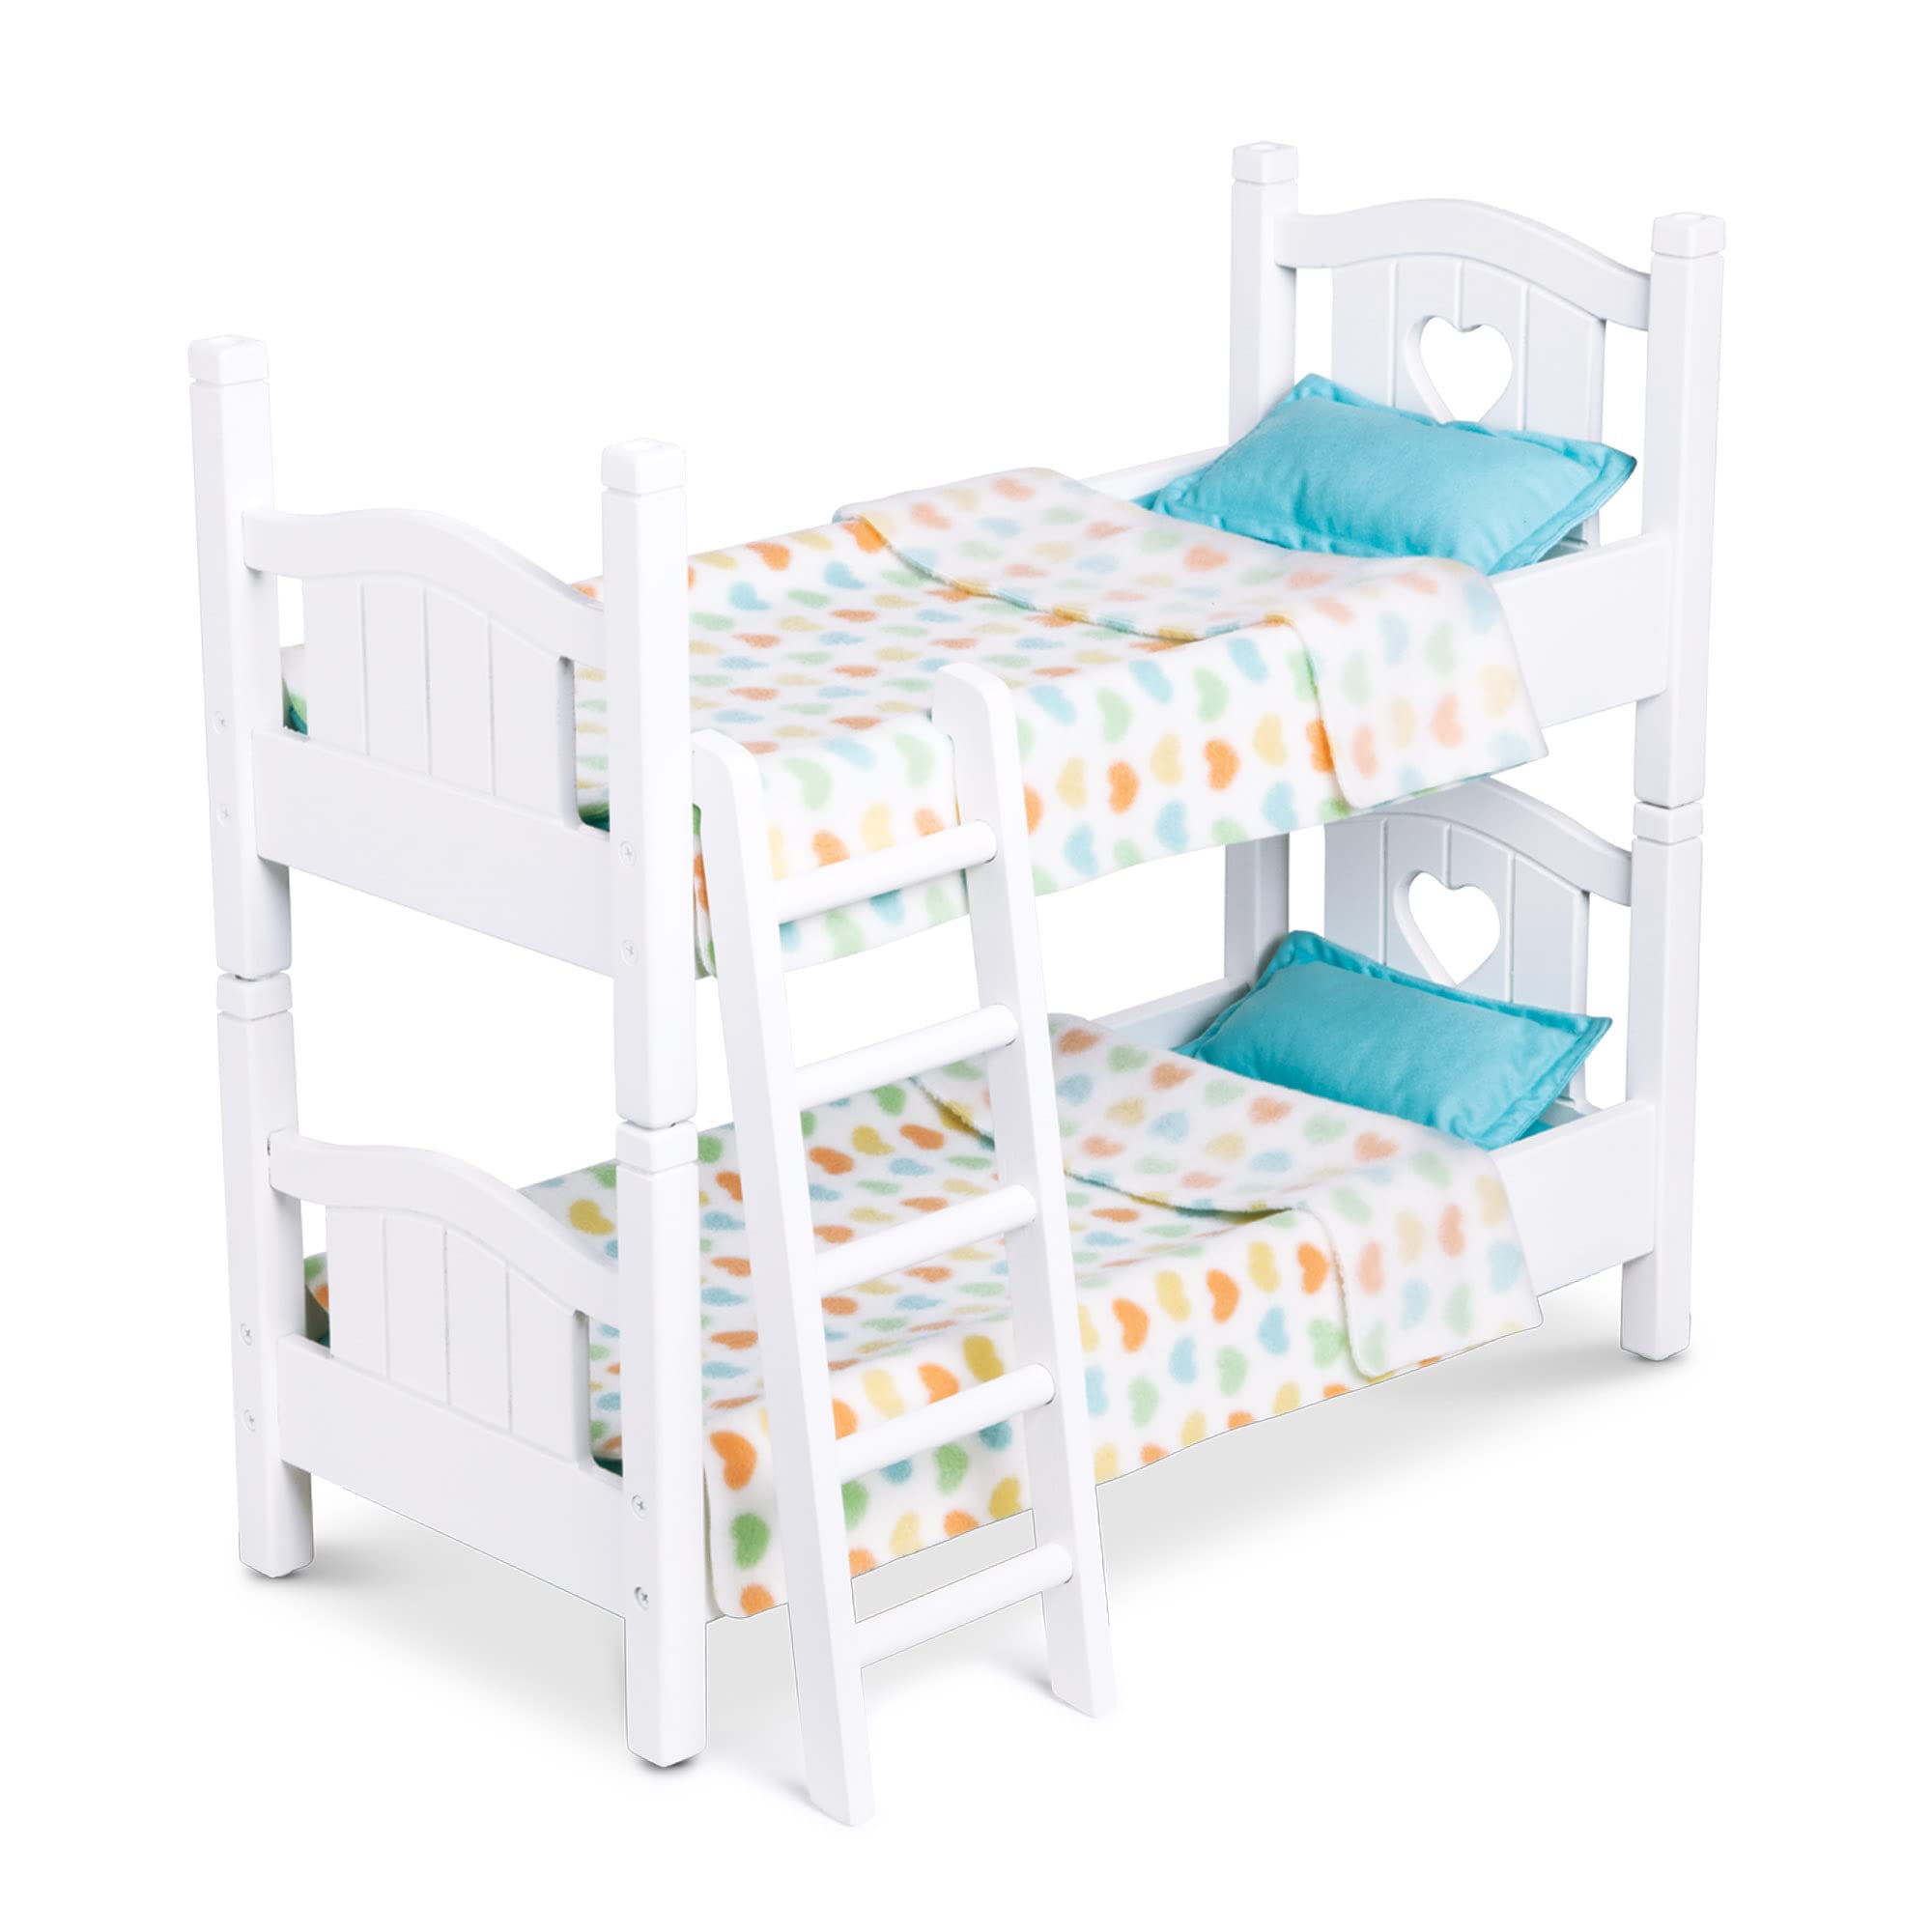 Melissa & Doug Mine to Love Wooden Play Bunk Bed for Dolls up to 18 inches-Stuffed Animals - White (2 Beds, 17.4”H x 9.1”W x 20.7”L Assembled and Stacked)